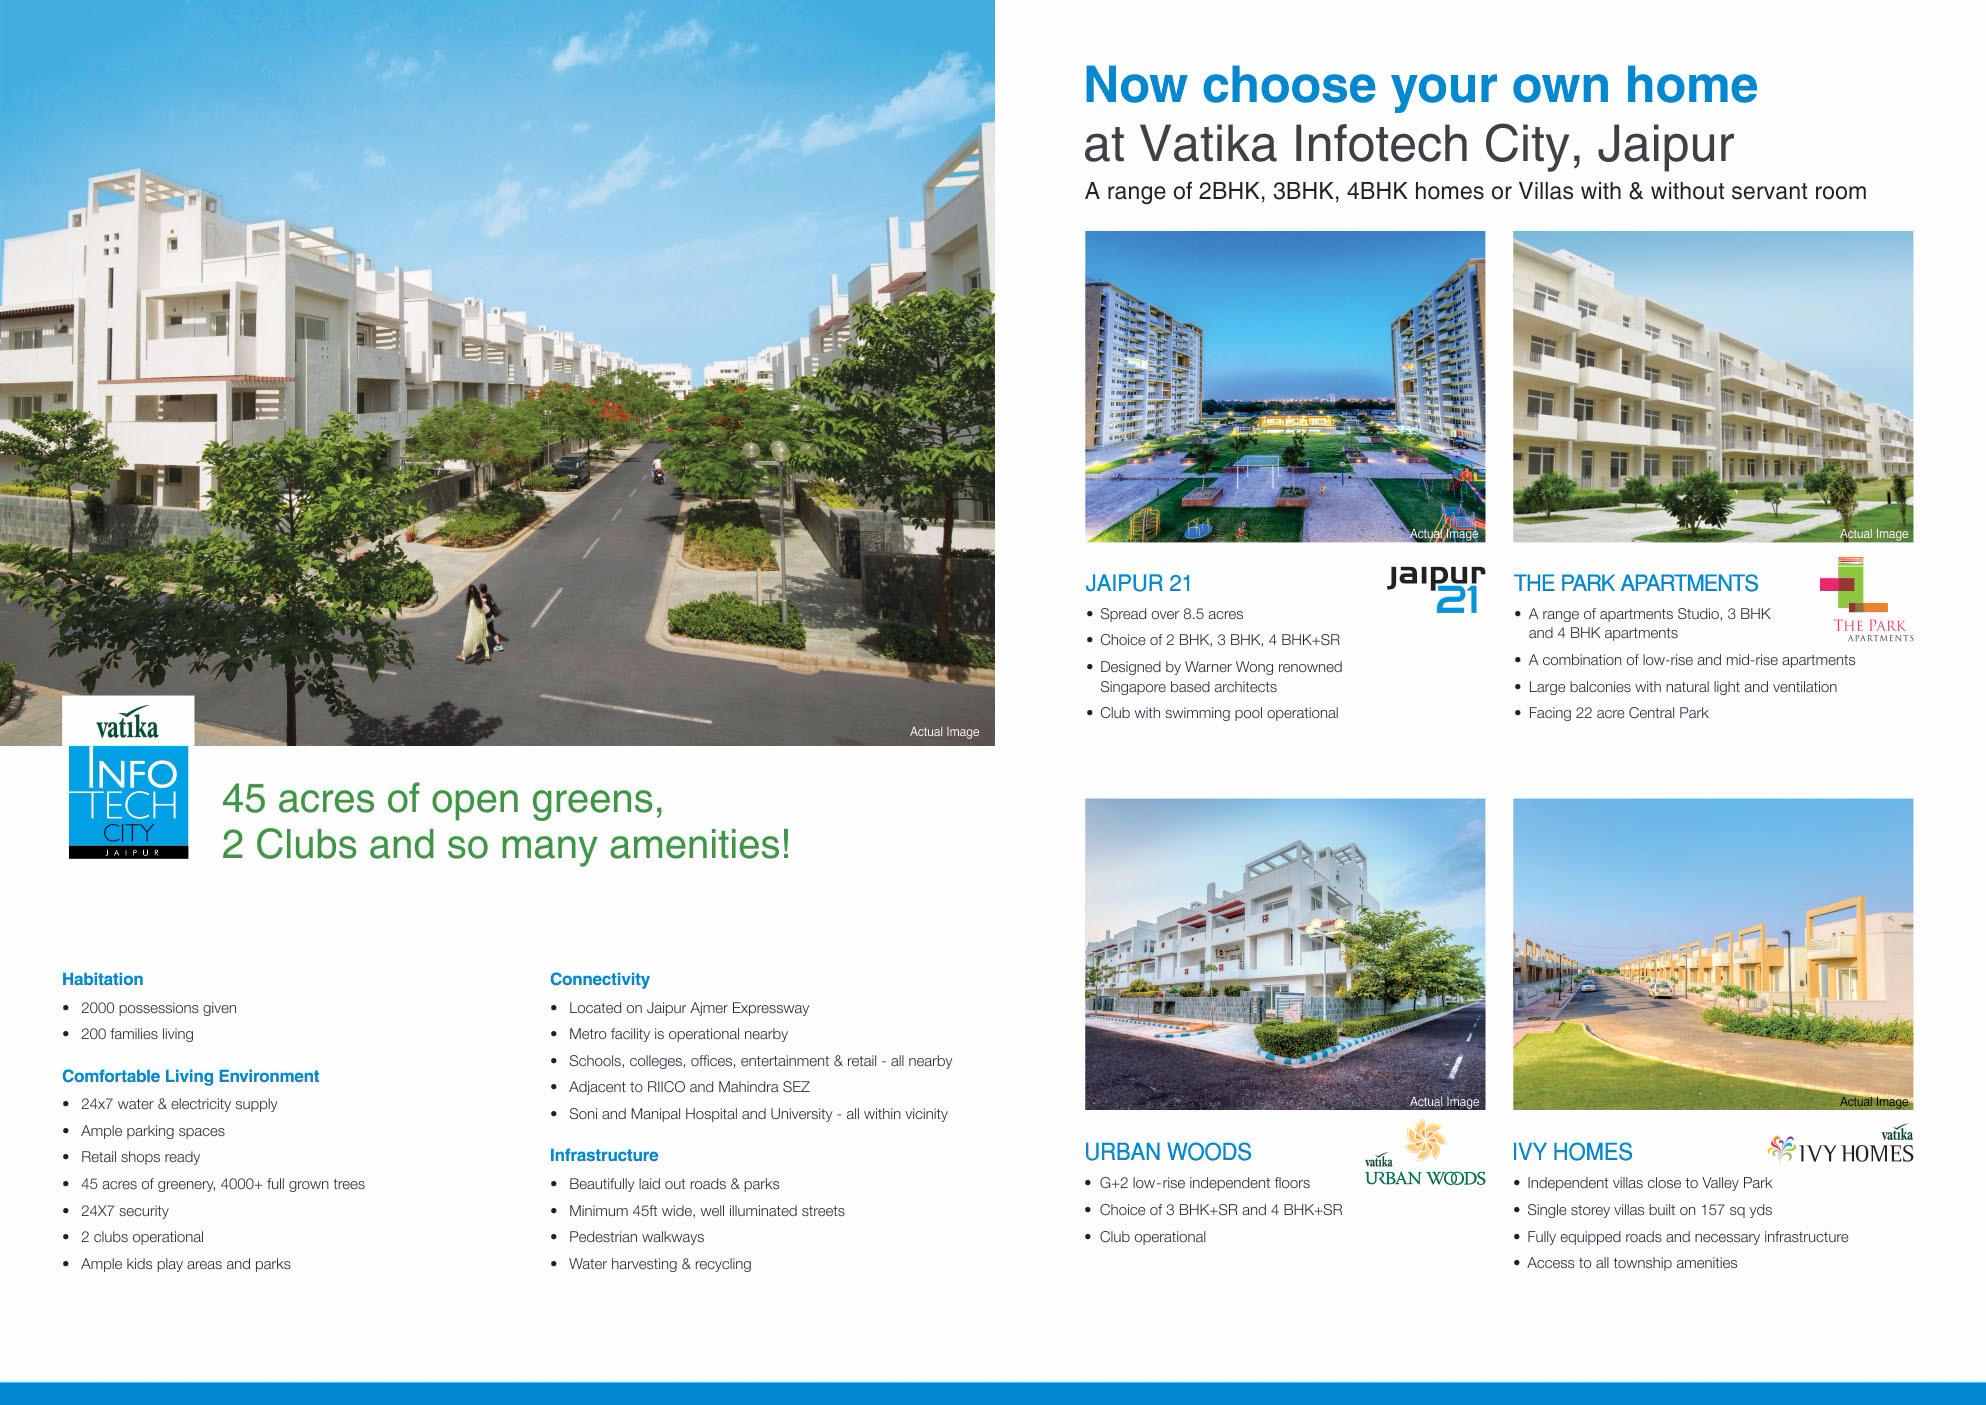 Now choose your own home at Vatika Infotech City in Jaipur